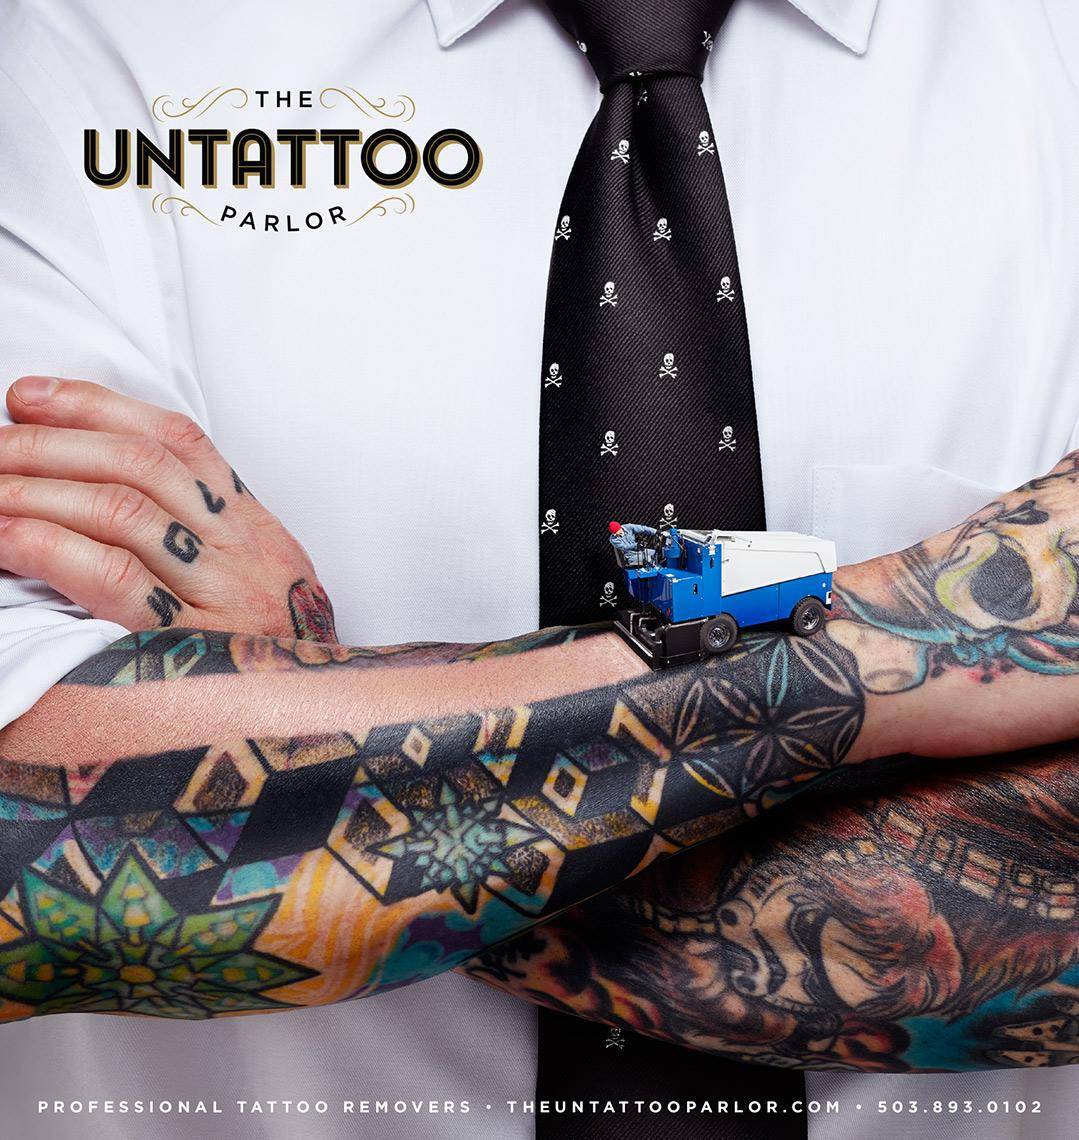 Untattoo Parlor Image Composite, Effects and Retouching